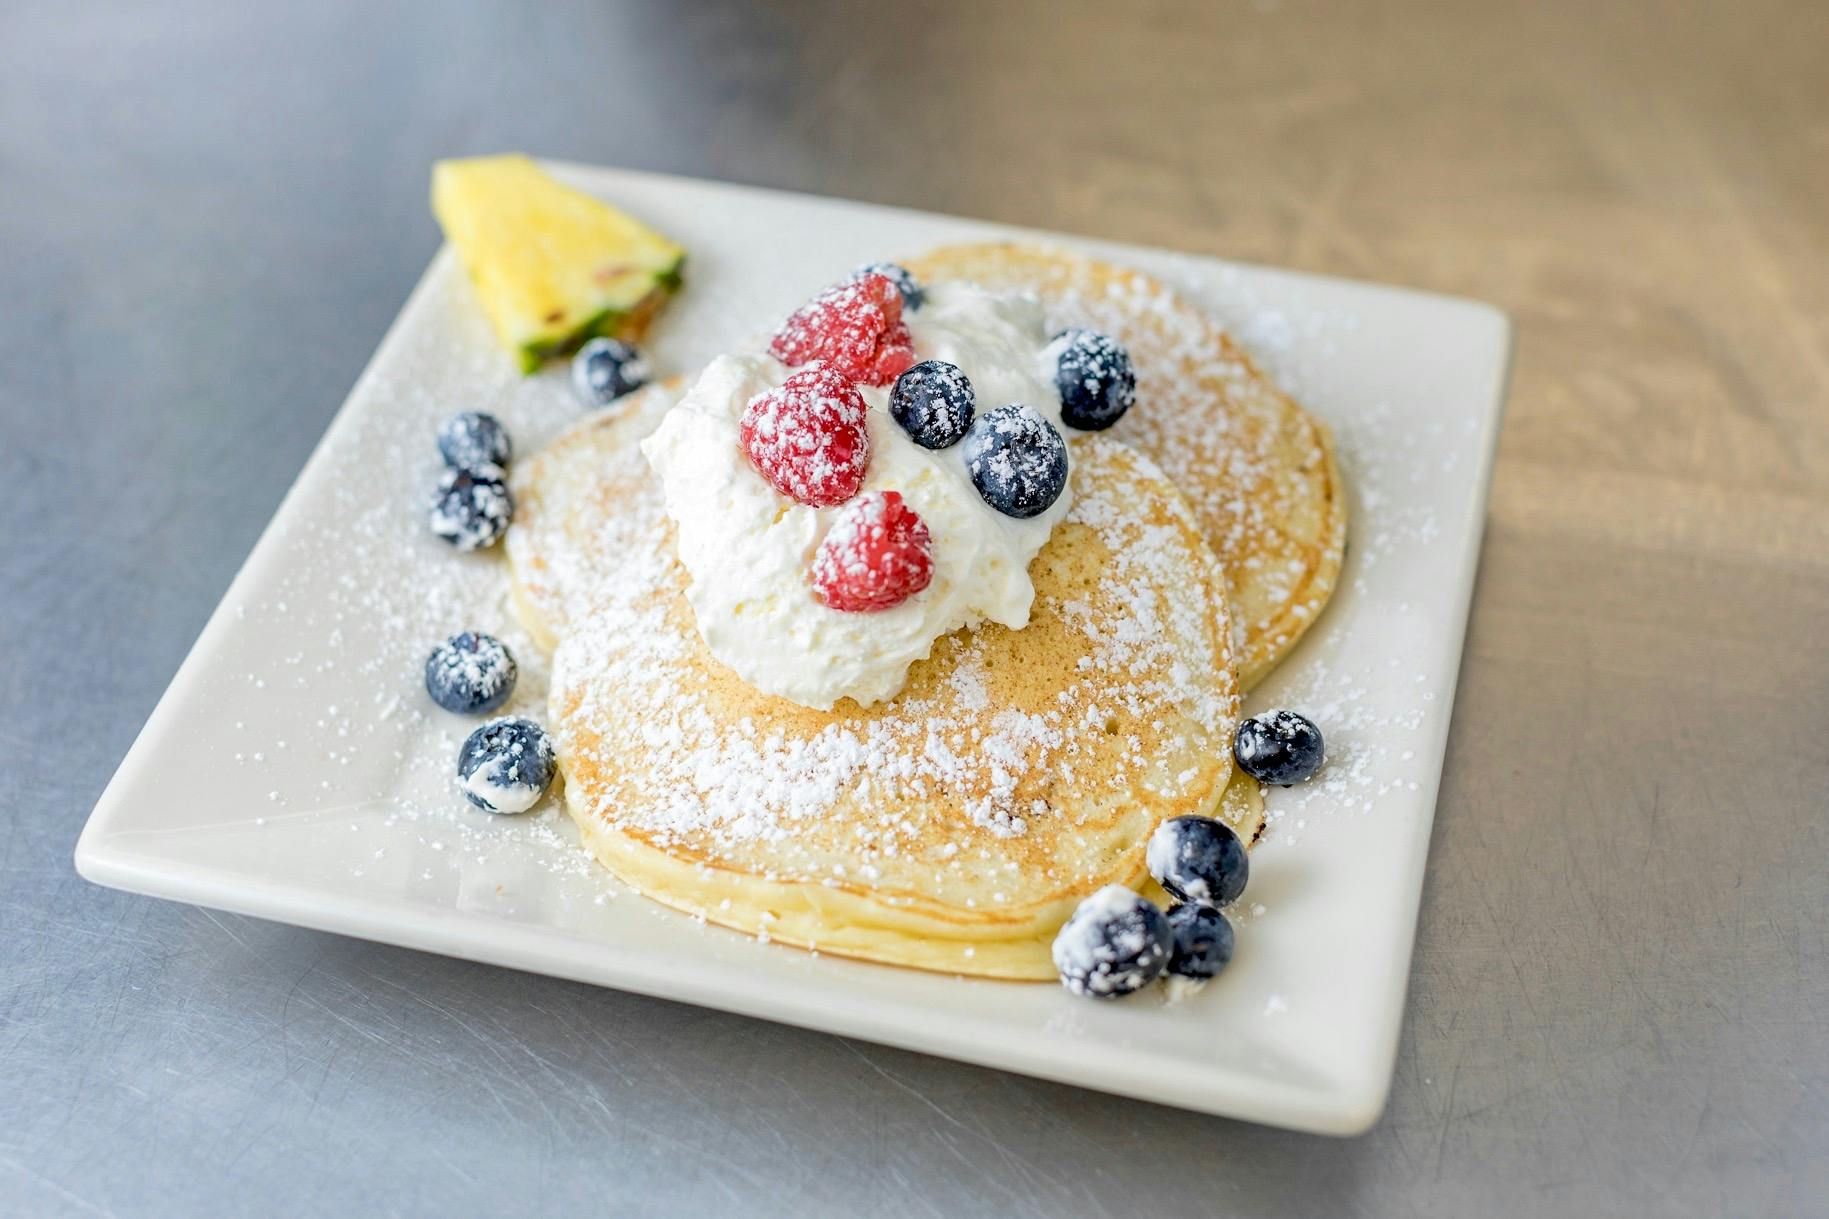 Lemon Ricotta Pancakes from The French Press in Eau Claire, WI